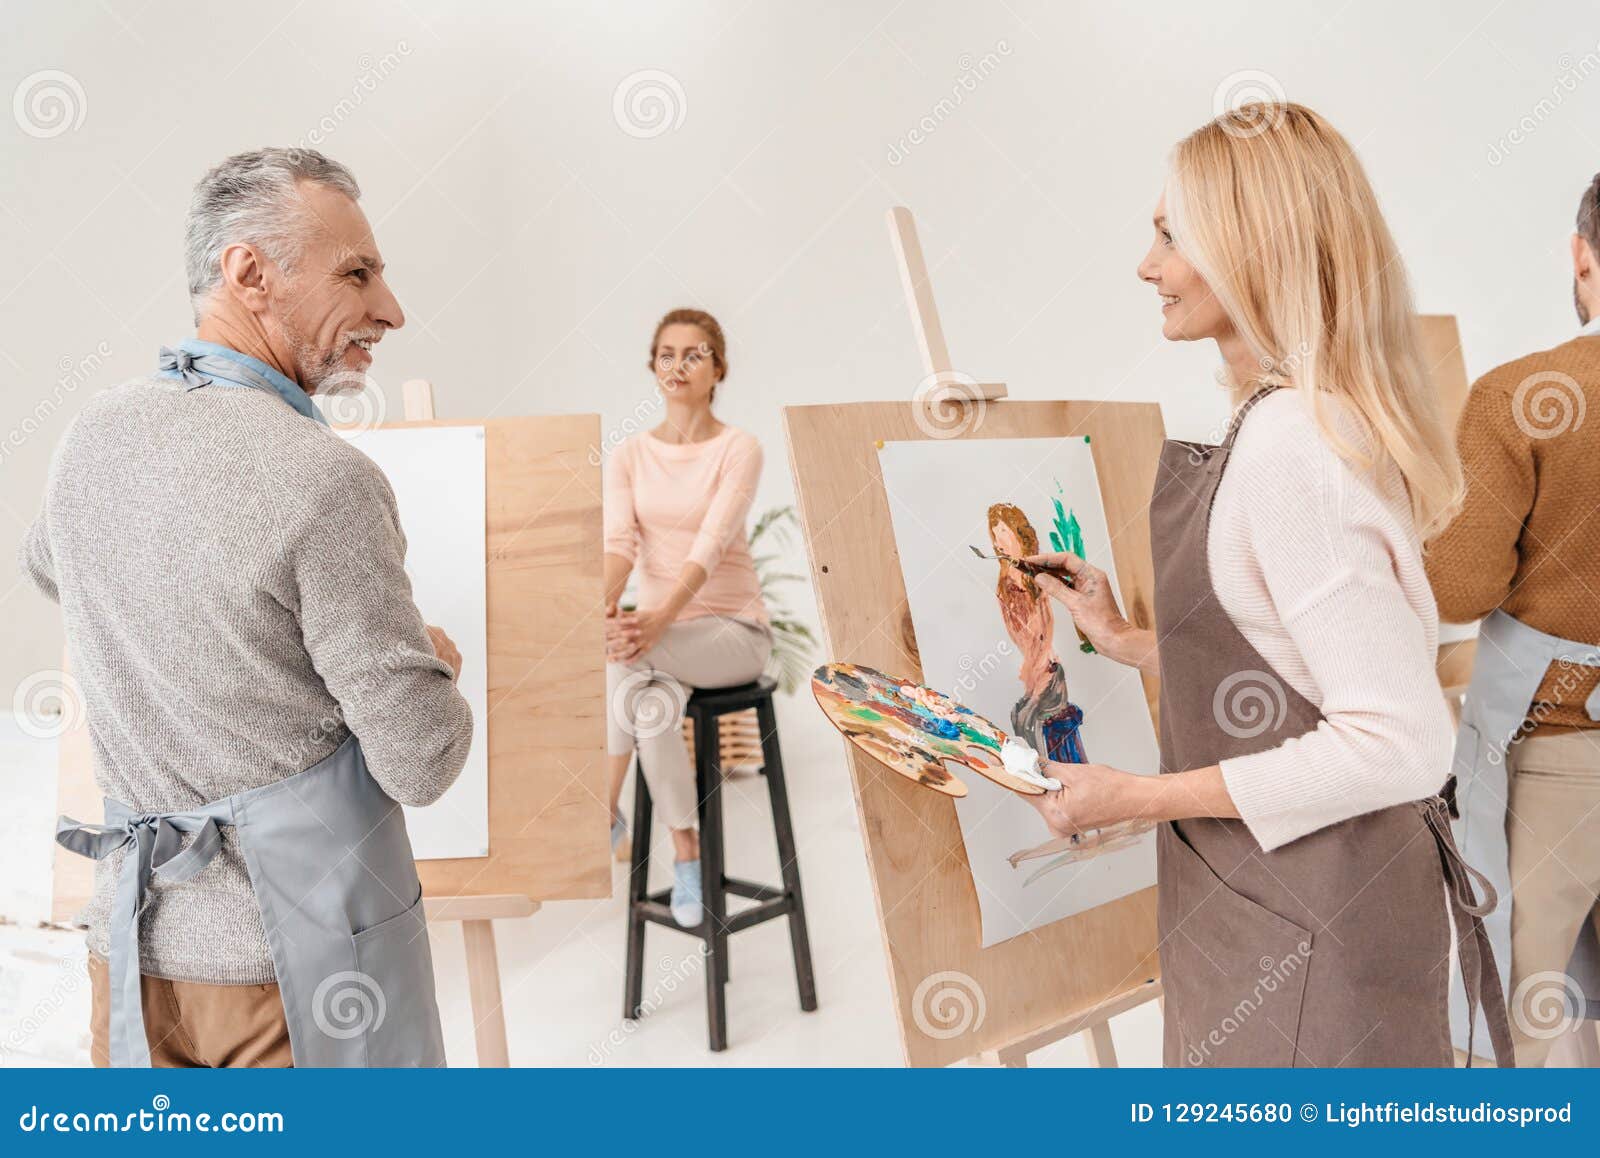 senior artists painting and looking at each other